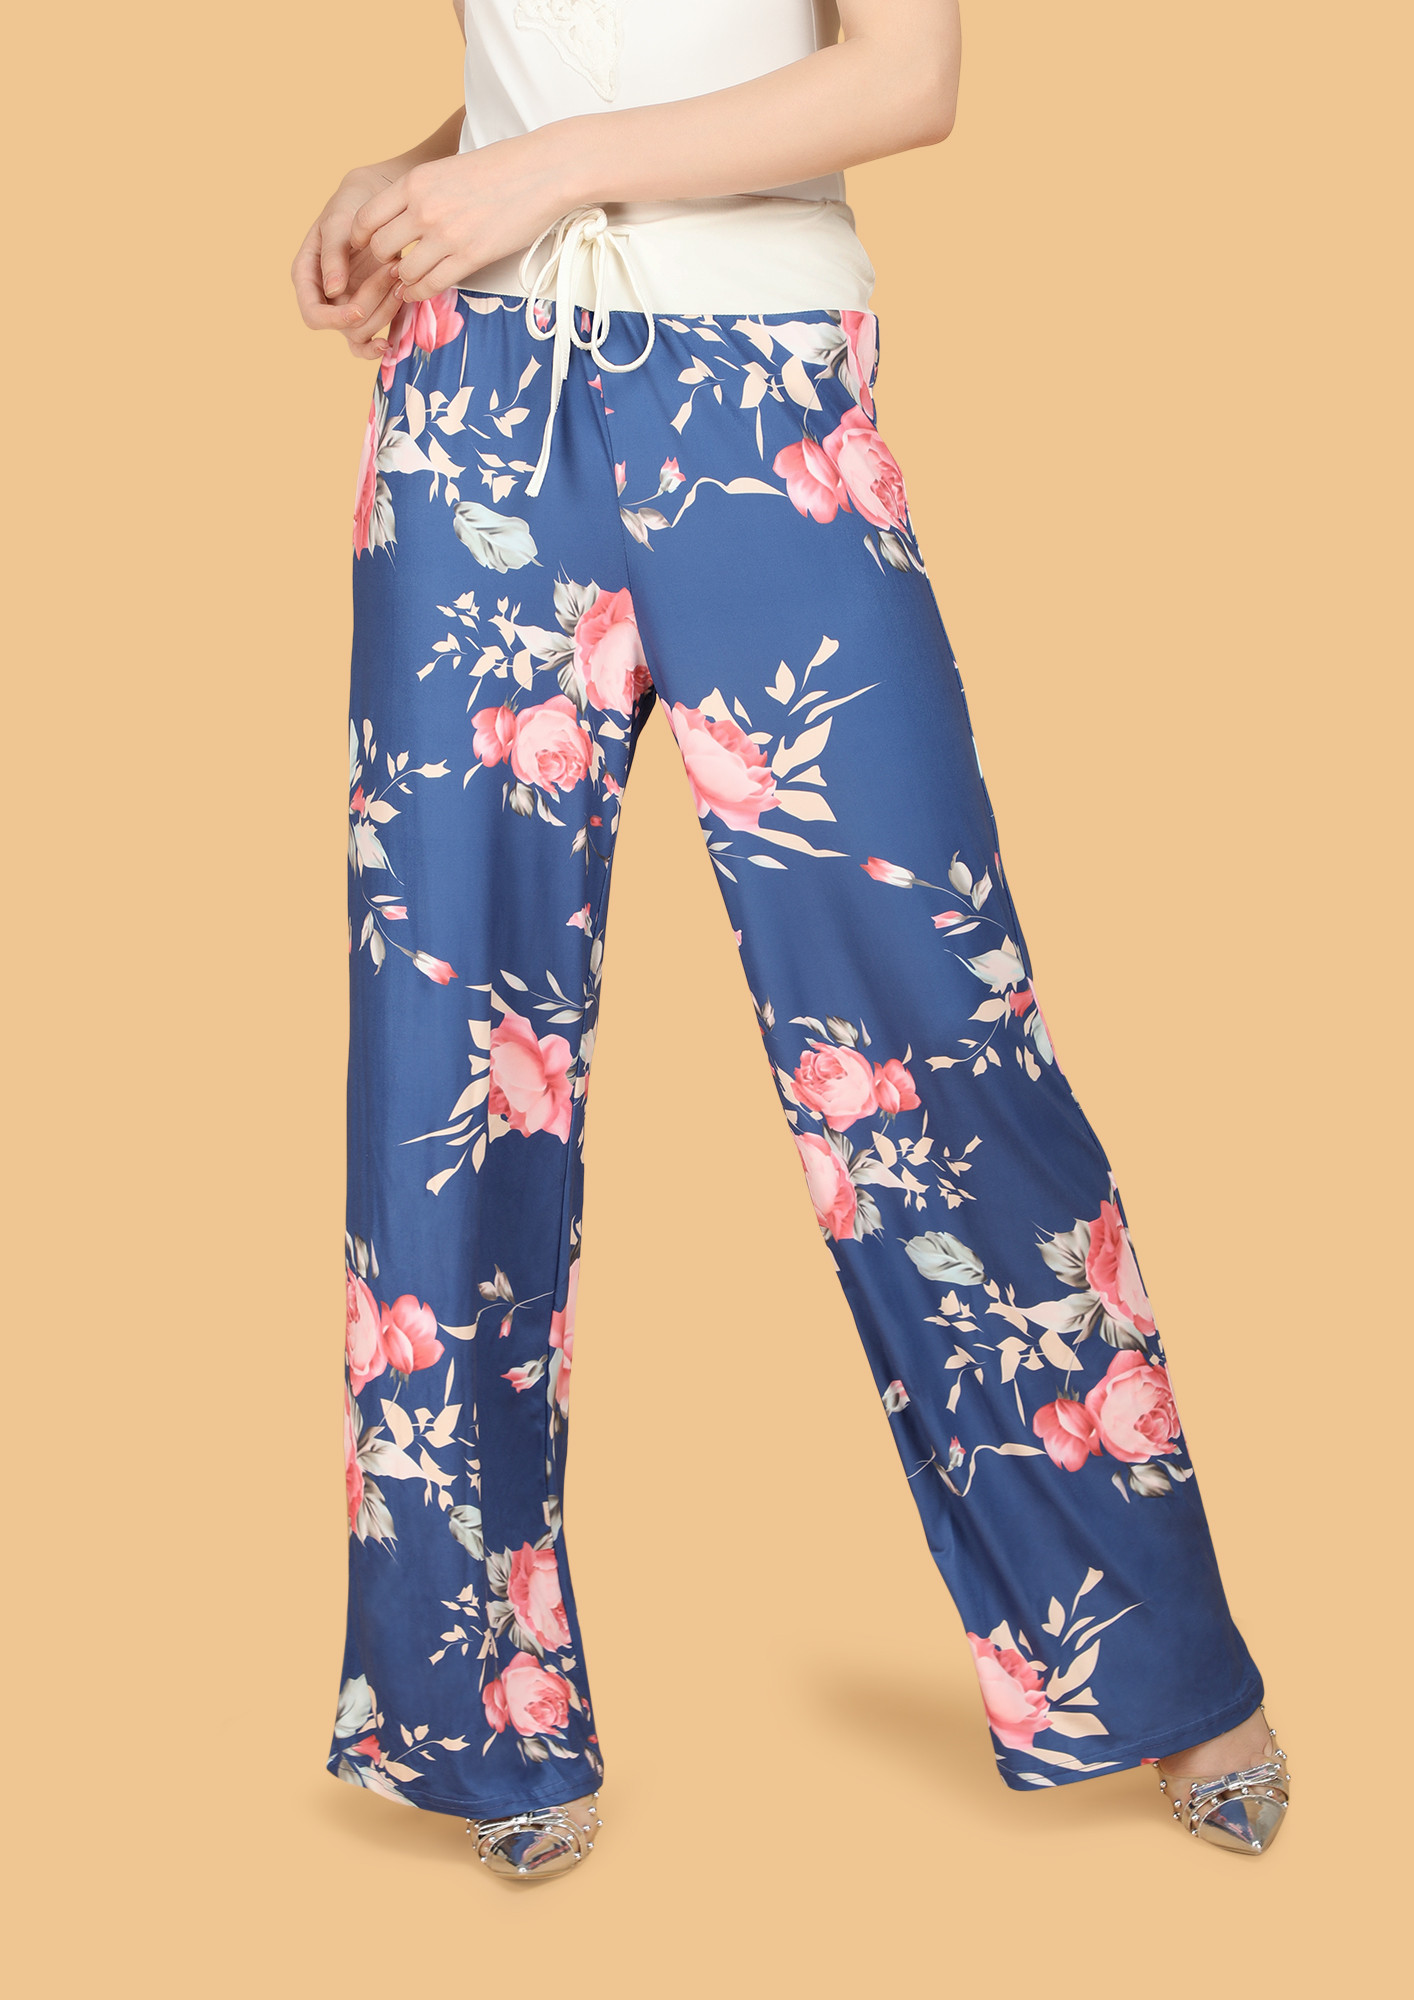 LOVE AT FIRST SIGHT BLUE FLORAL PANTS